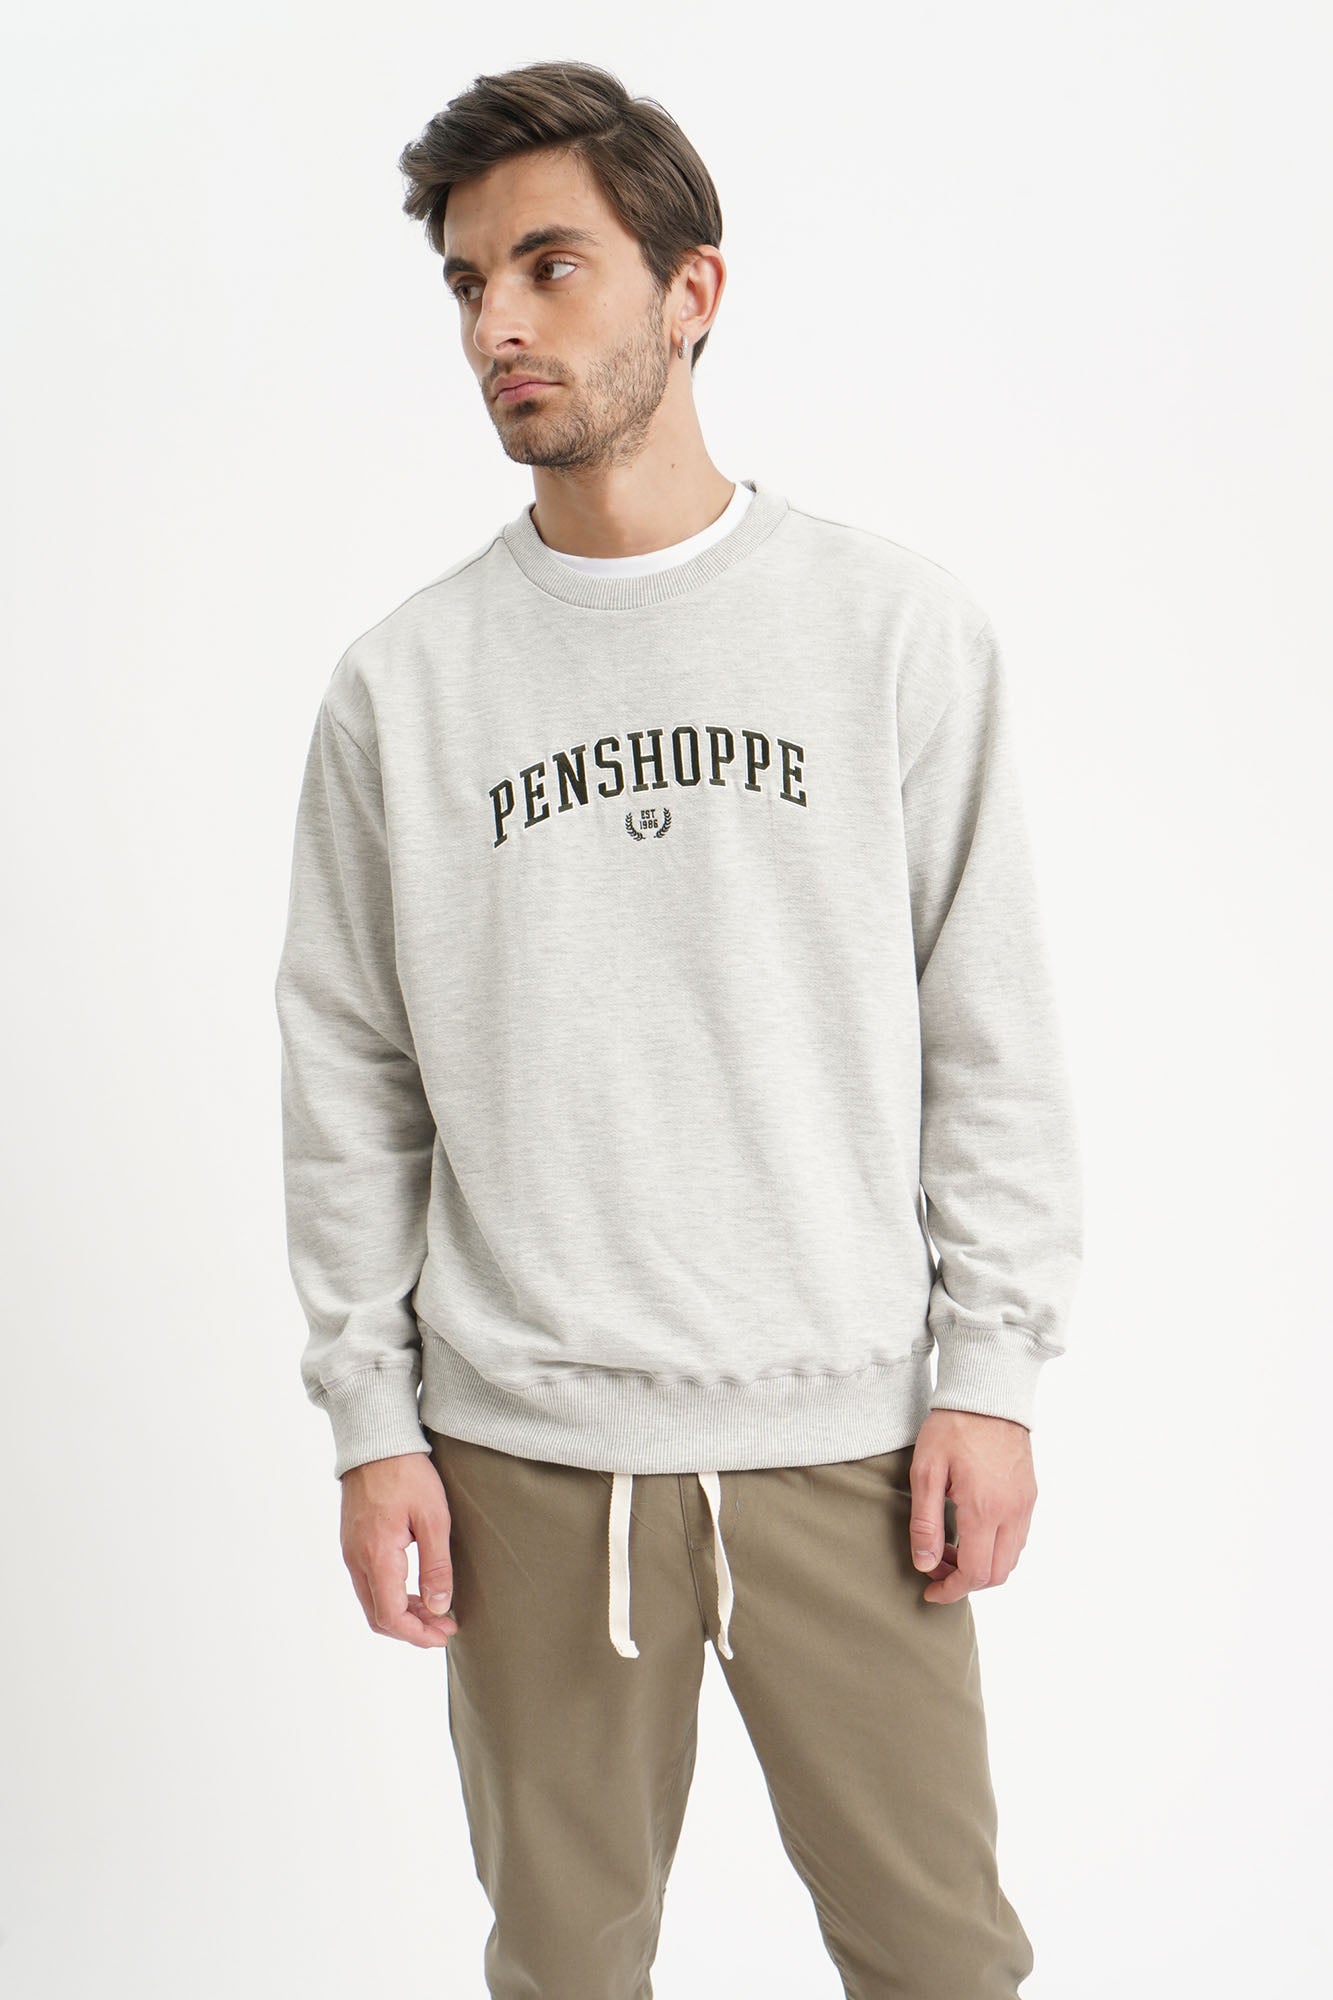 Relaxed Fit Pullover with Penshoppe Embroidery